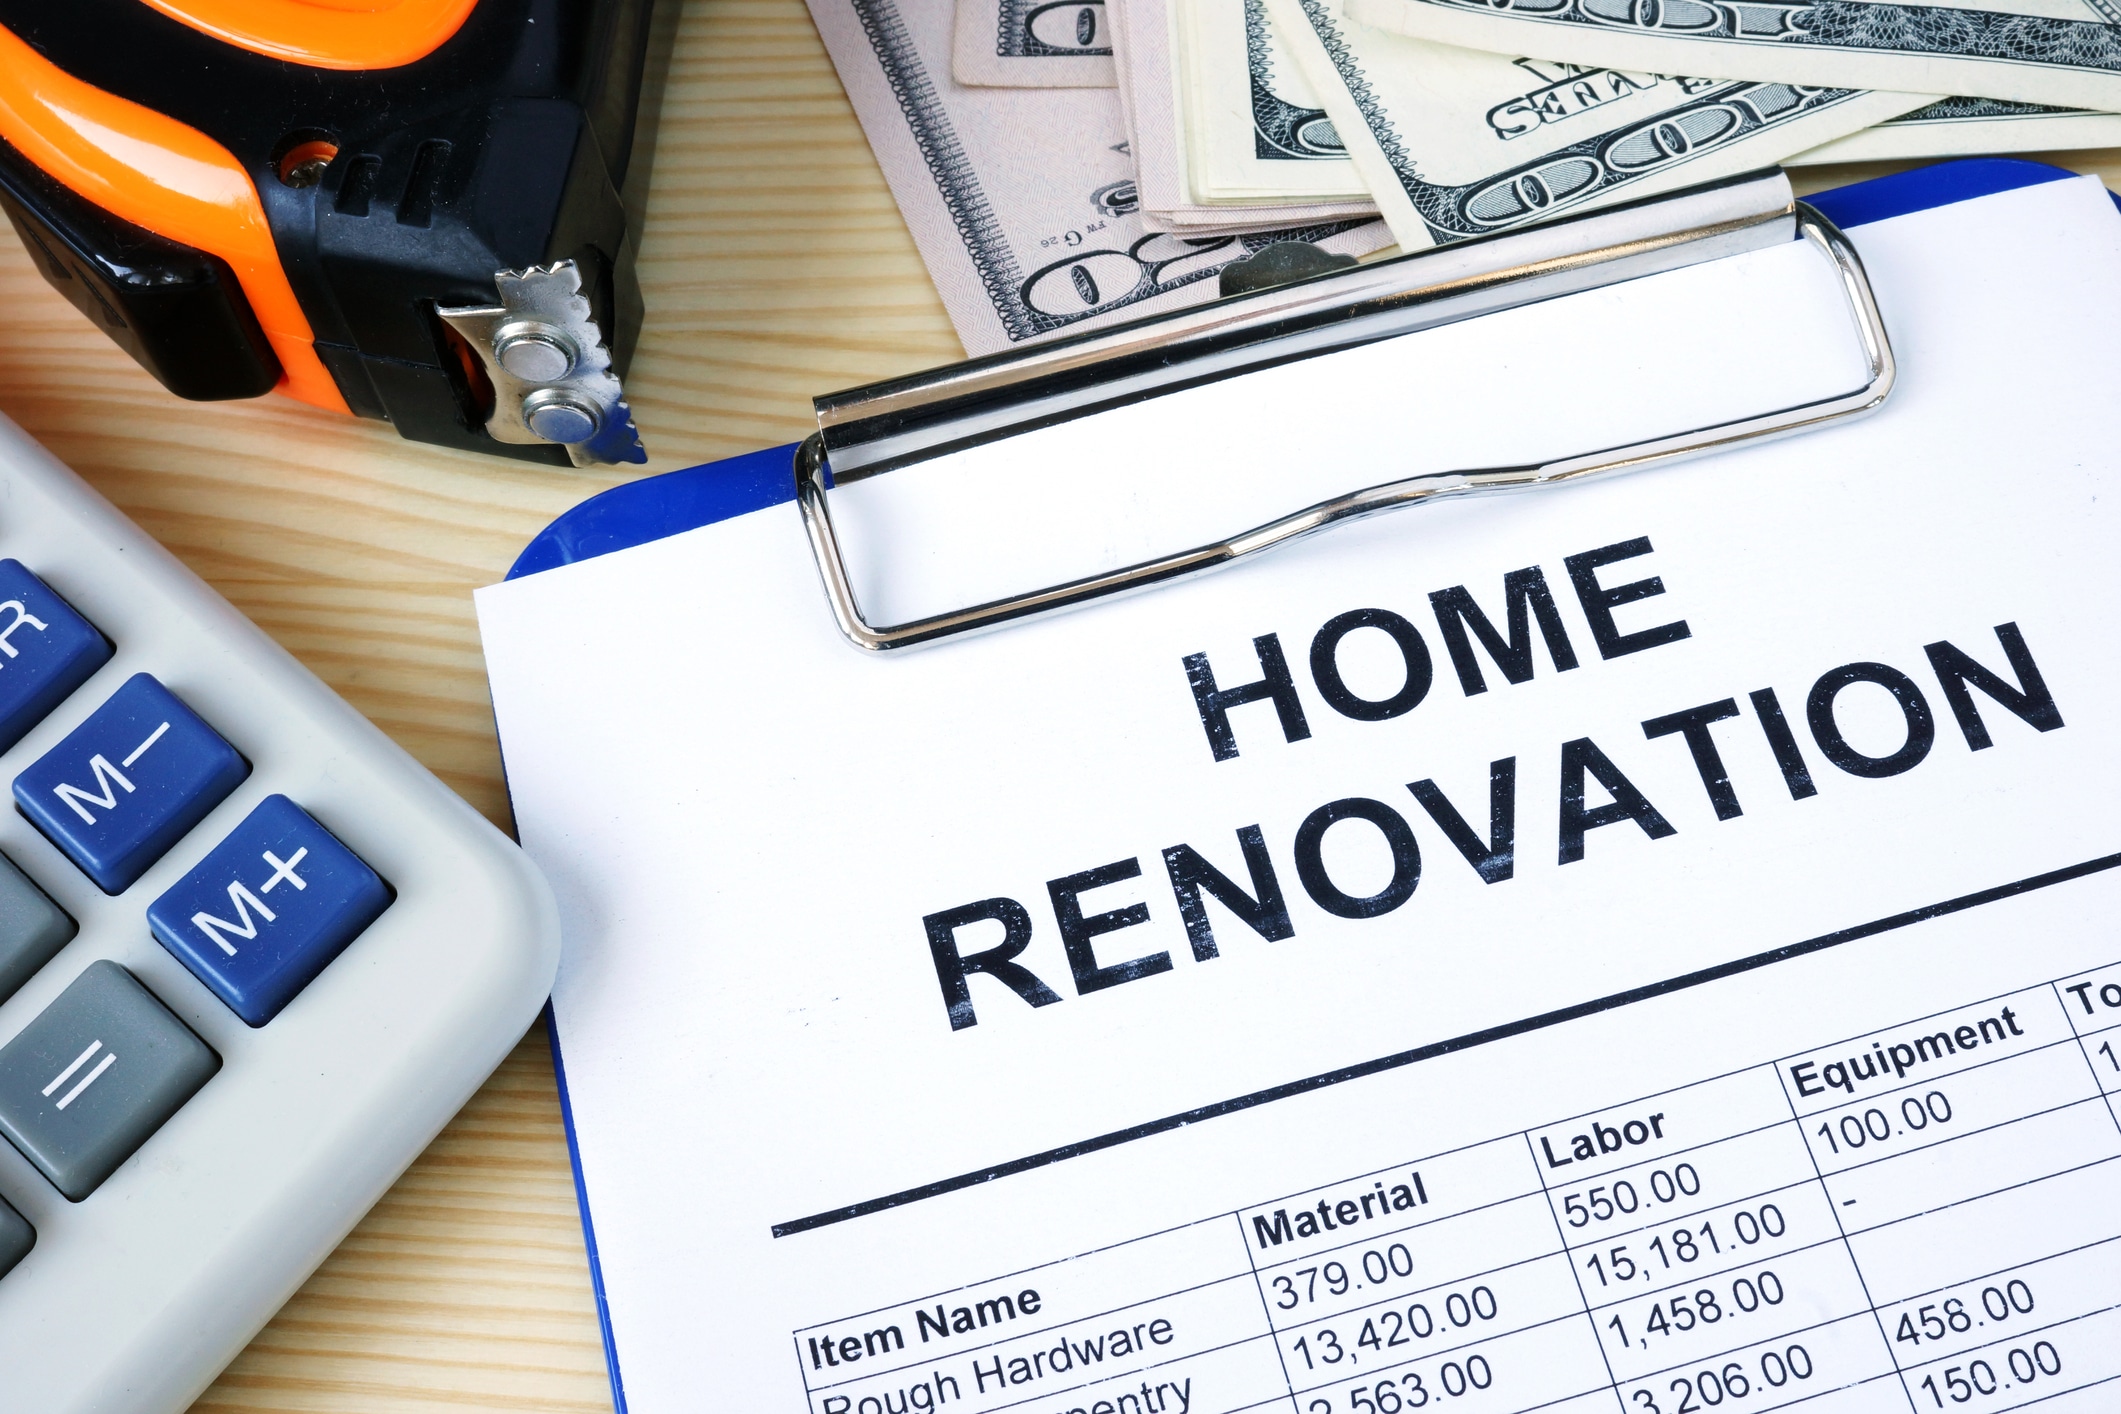 Find a home renovation contractor that offers financing